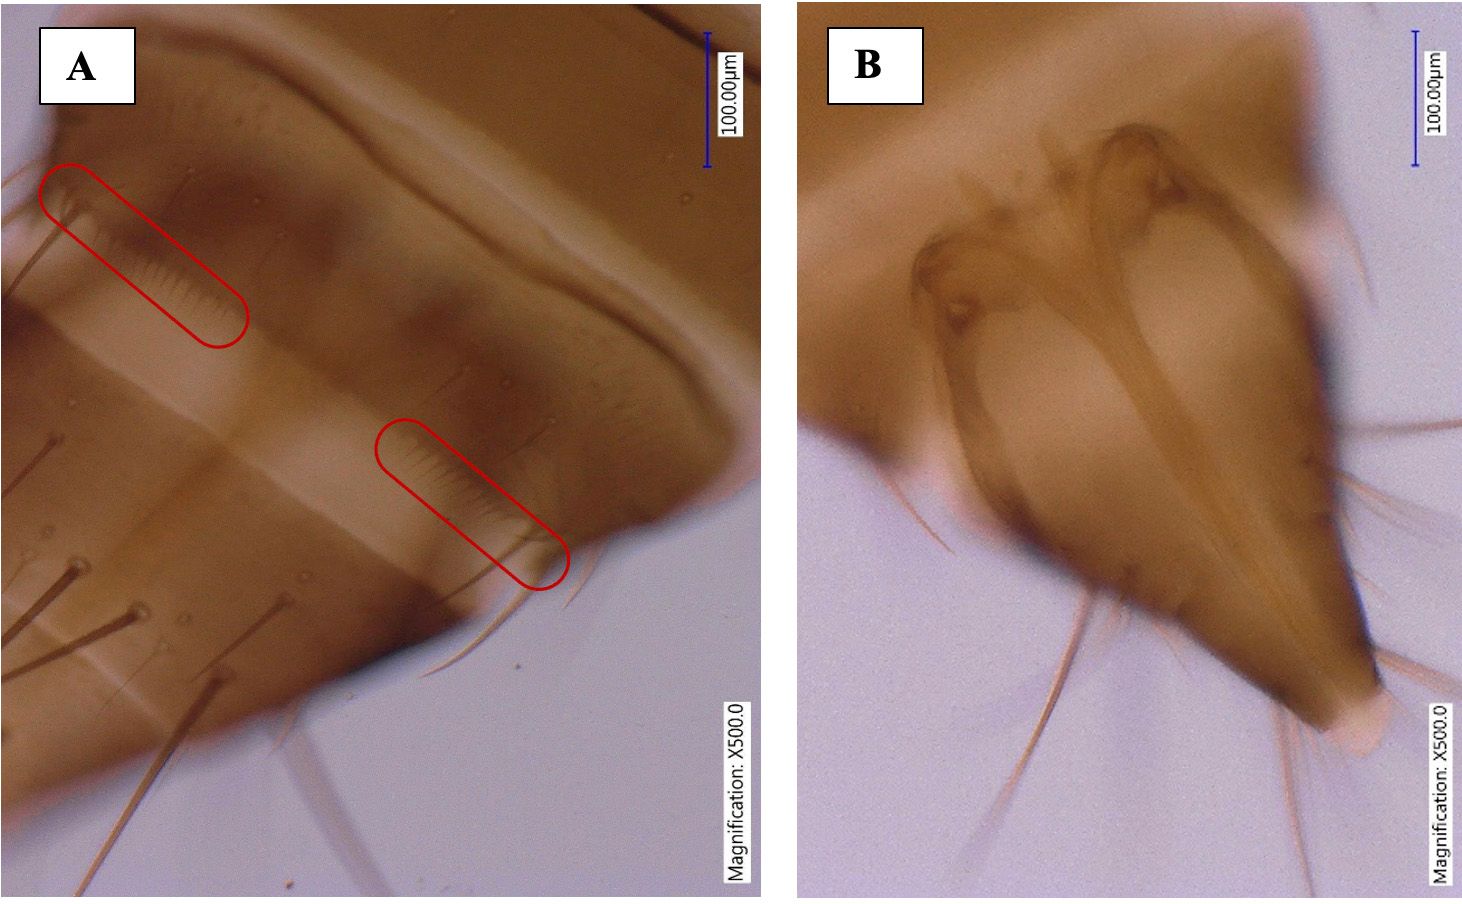 Abdominal tergites of a female adult composite thrips, Megalurothrips usitatus Bagnall, showing incomplete comb at eighth abdominal segment (A) and ovipositor (B). 